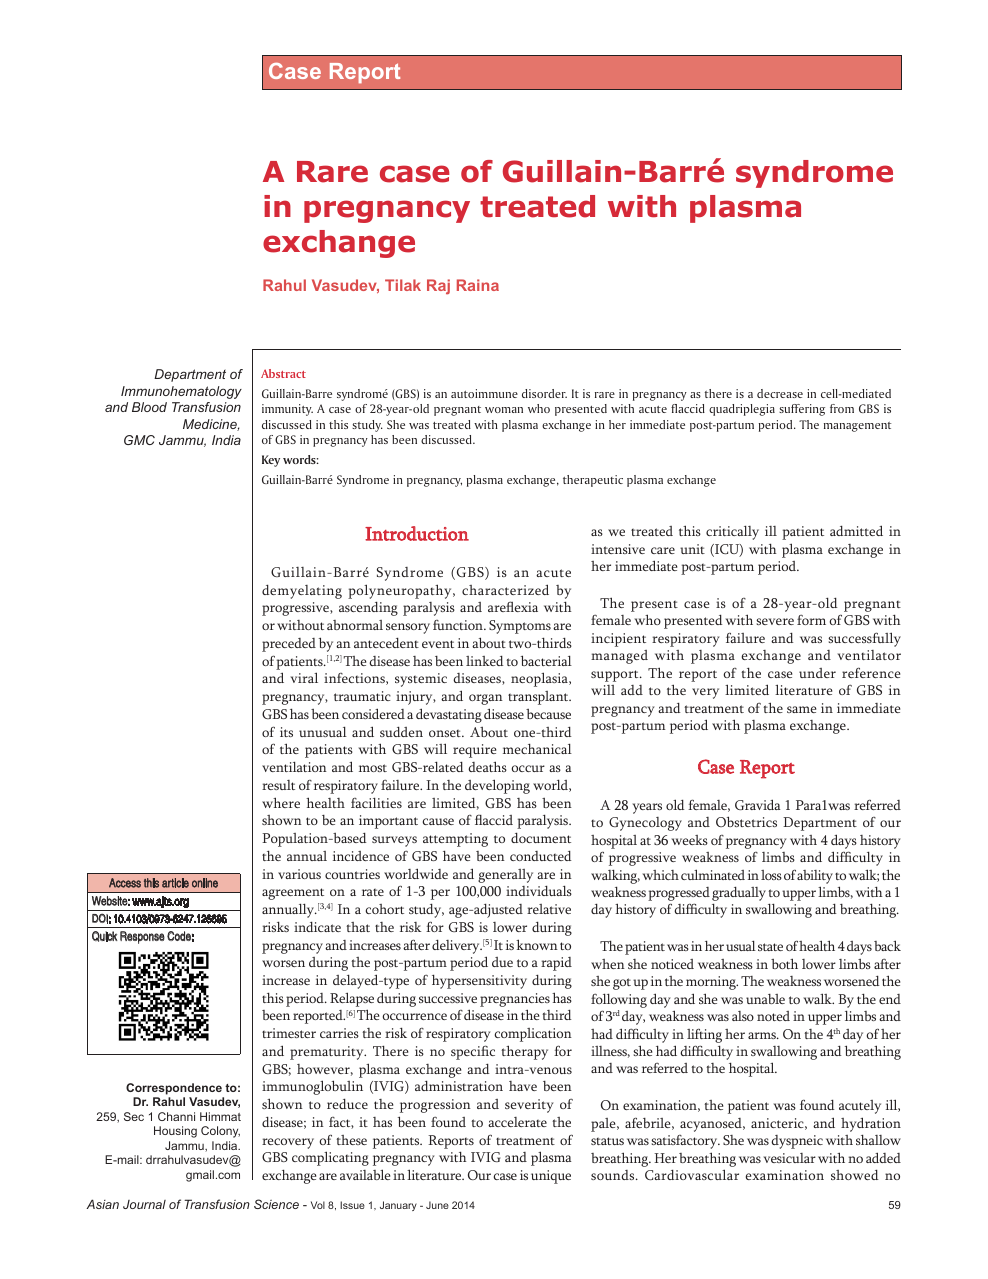 A Rare Case Of Guillain Barre Syndrome In Pregnancy Treated With Plasma Exchange Topic Of Research Paper In Clinical Medicine Download Scholarly Article Pdf And Read For Free On Cyberleninka Open Science